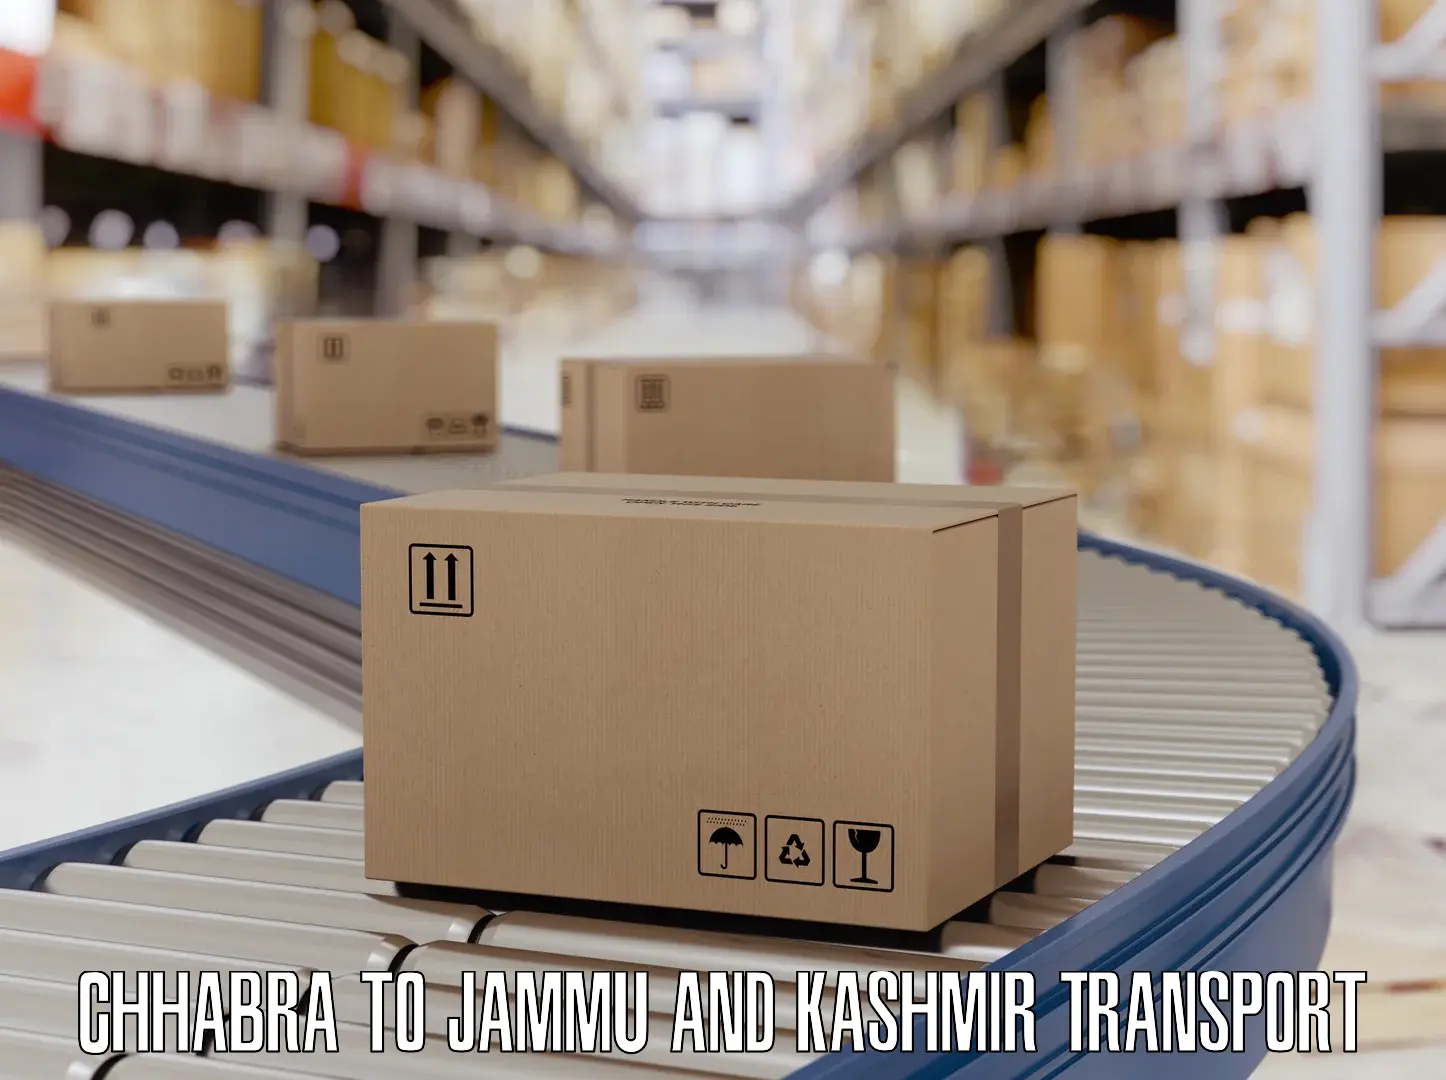 Truck transport companies in India Chhabra to Jammu and Kashmir